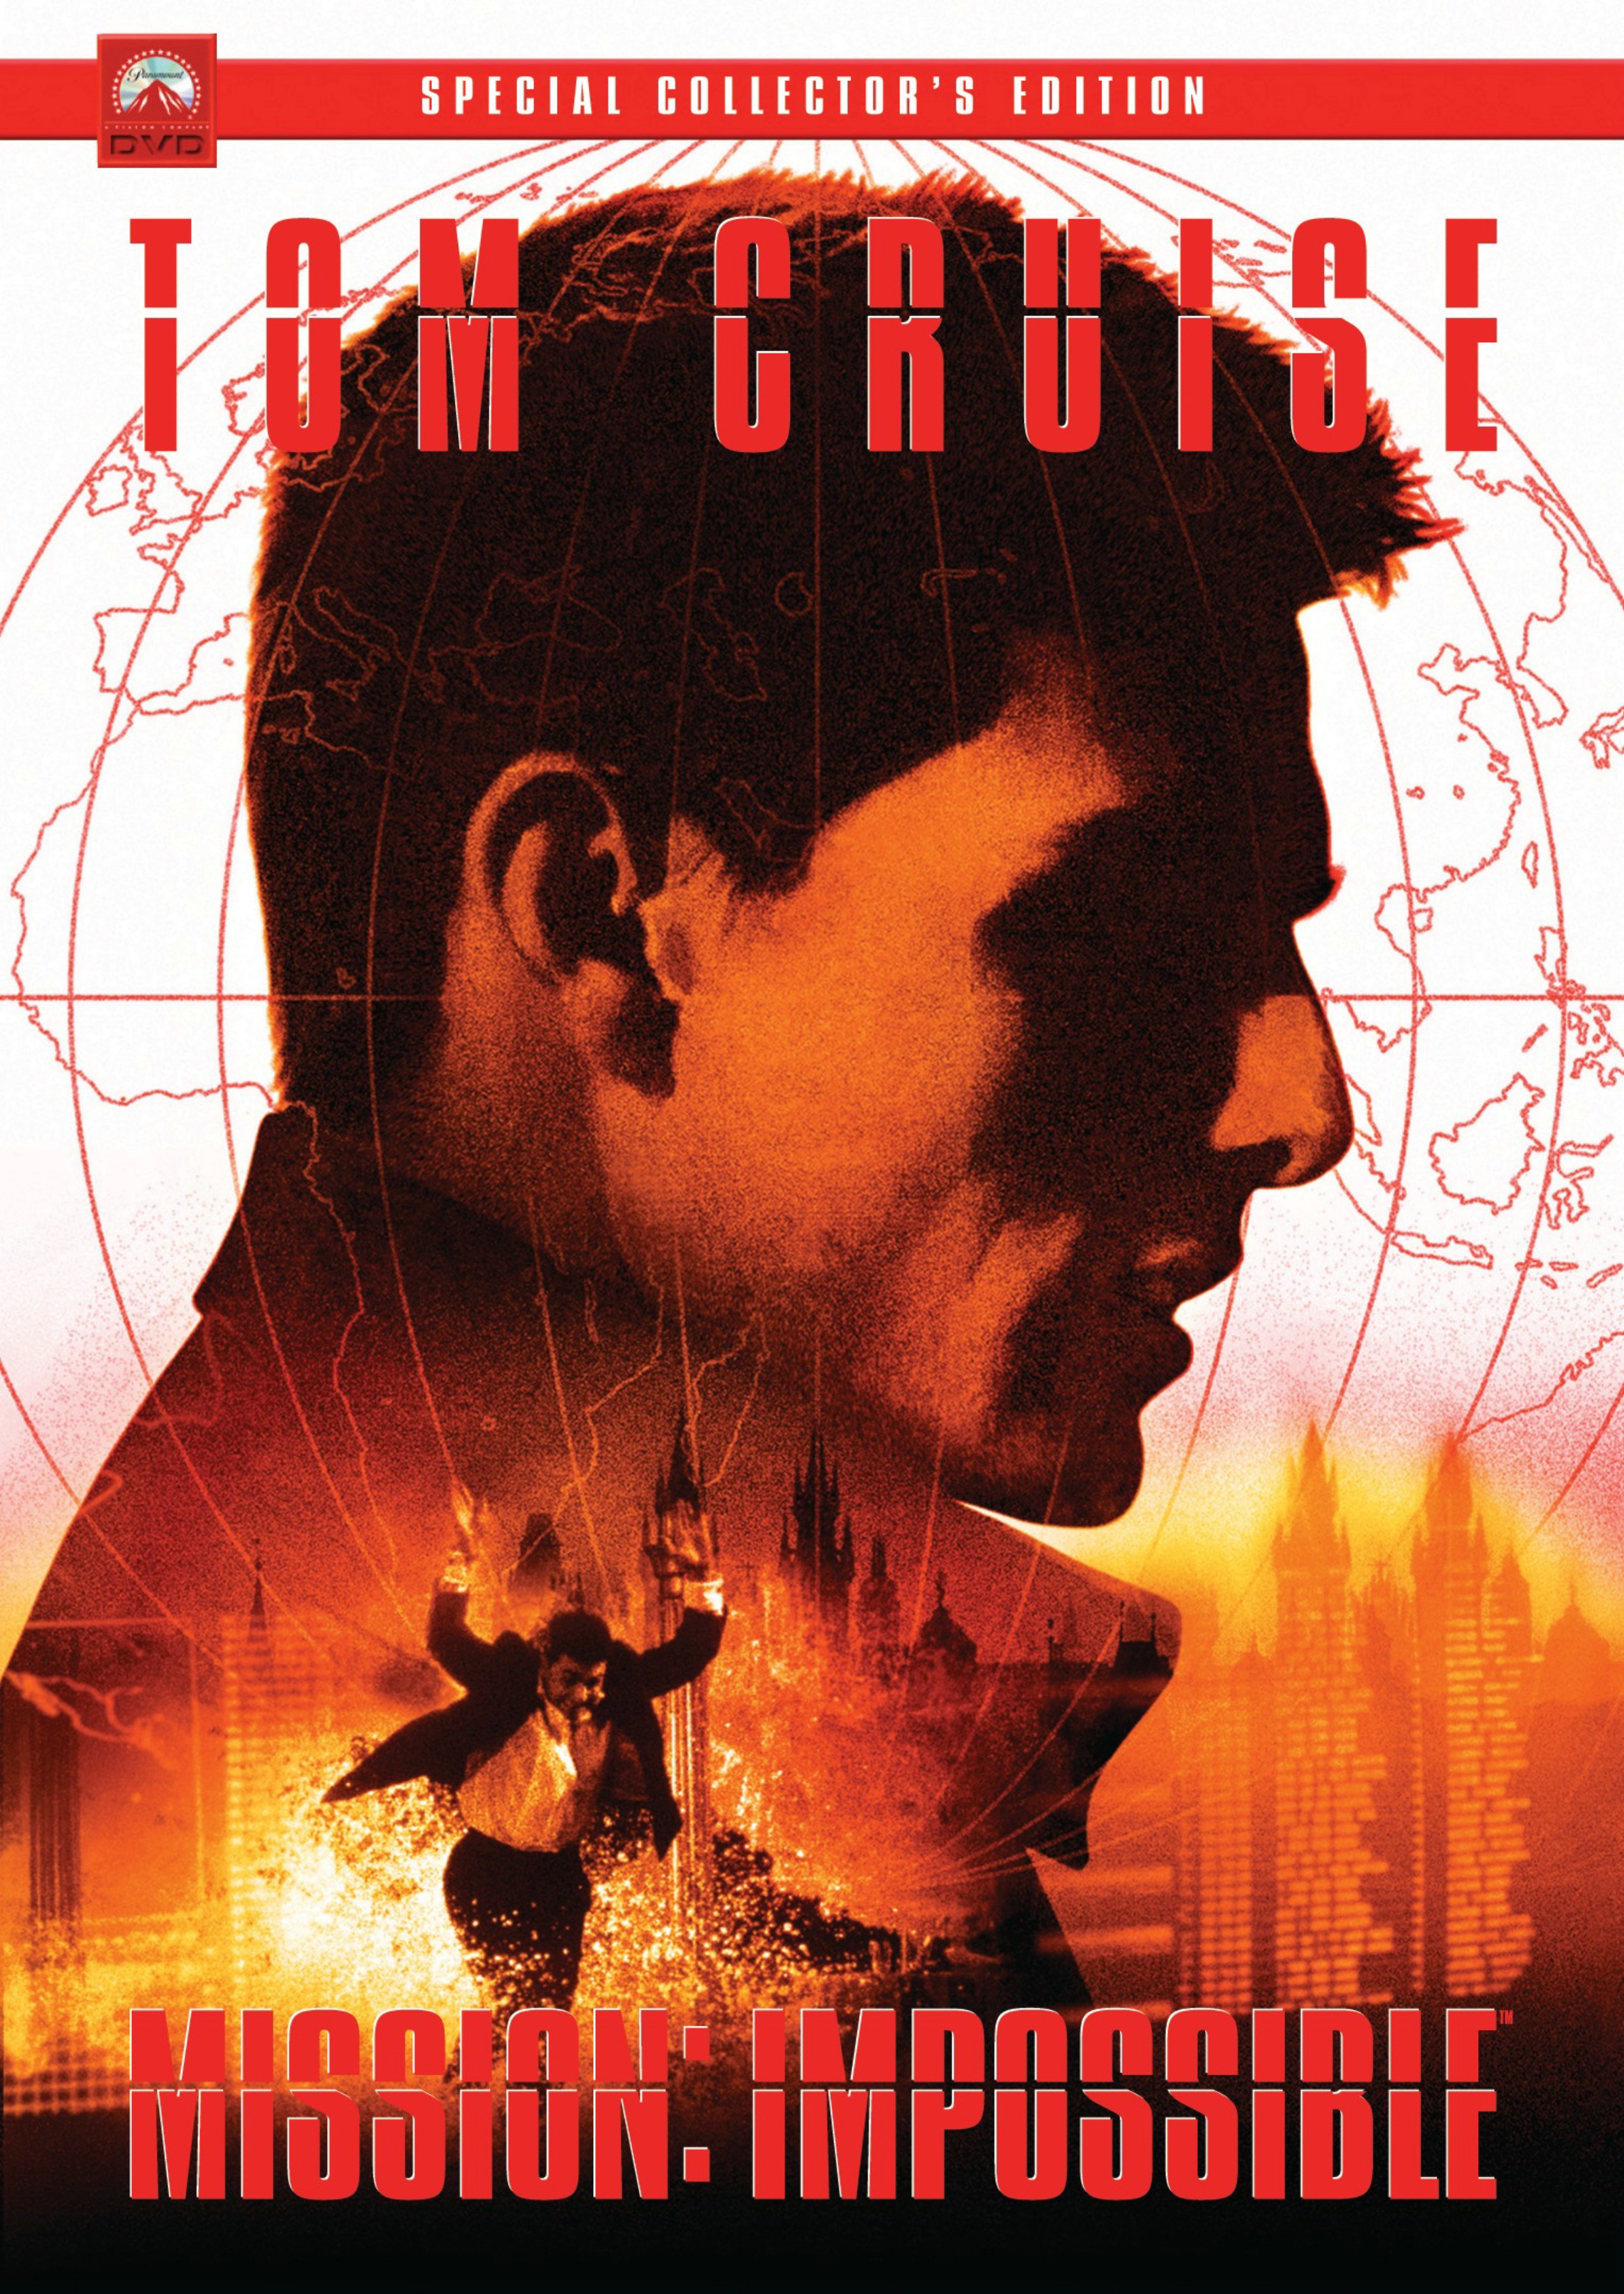 Mission: Impossible [Special Collector&#39; Edition] [DVD] [1996] - Best Buy